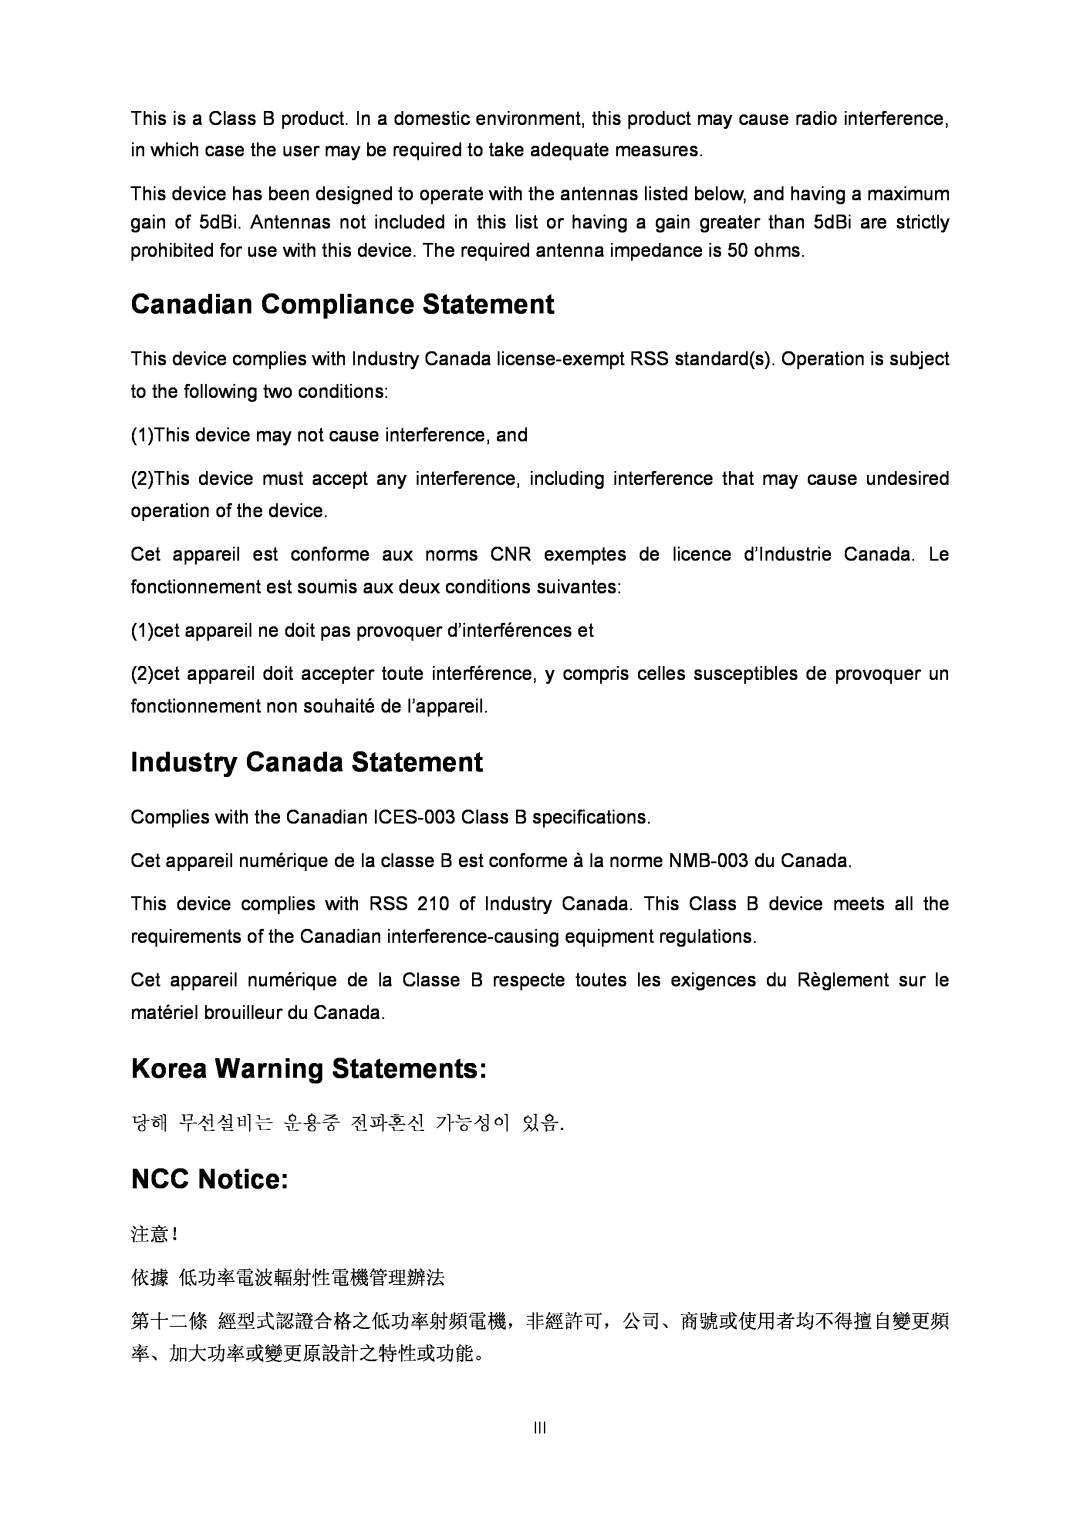 TP-Link TD-W8901N manual Canadian Compliance Statement, Industry Canada Statement, Korea Warning Statements, NCC Notice 